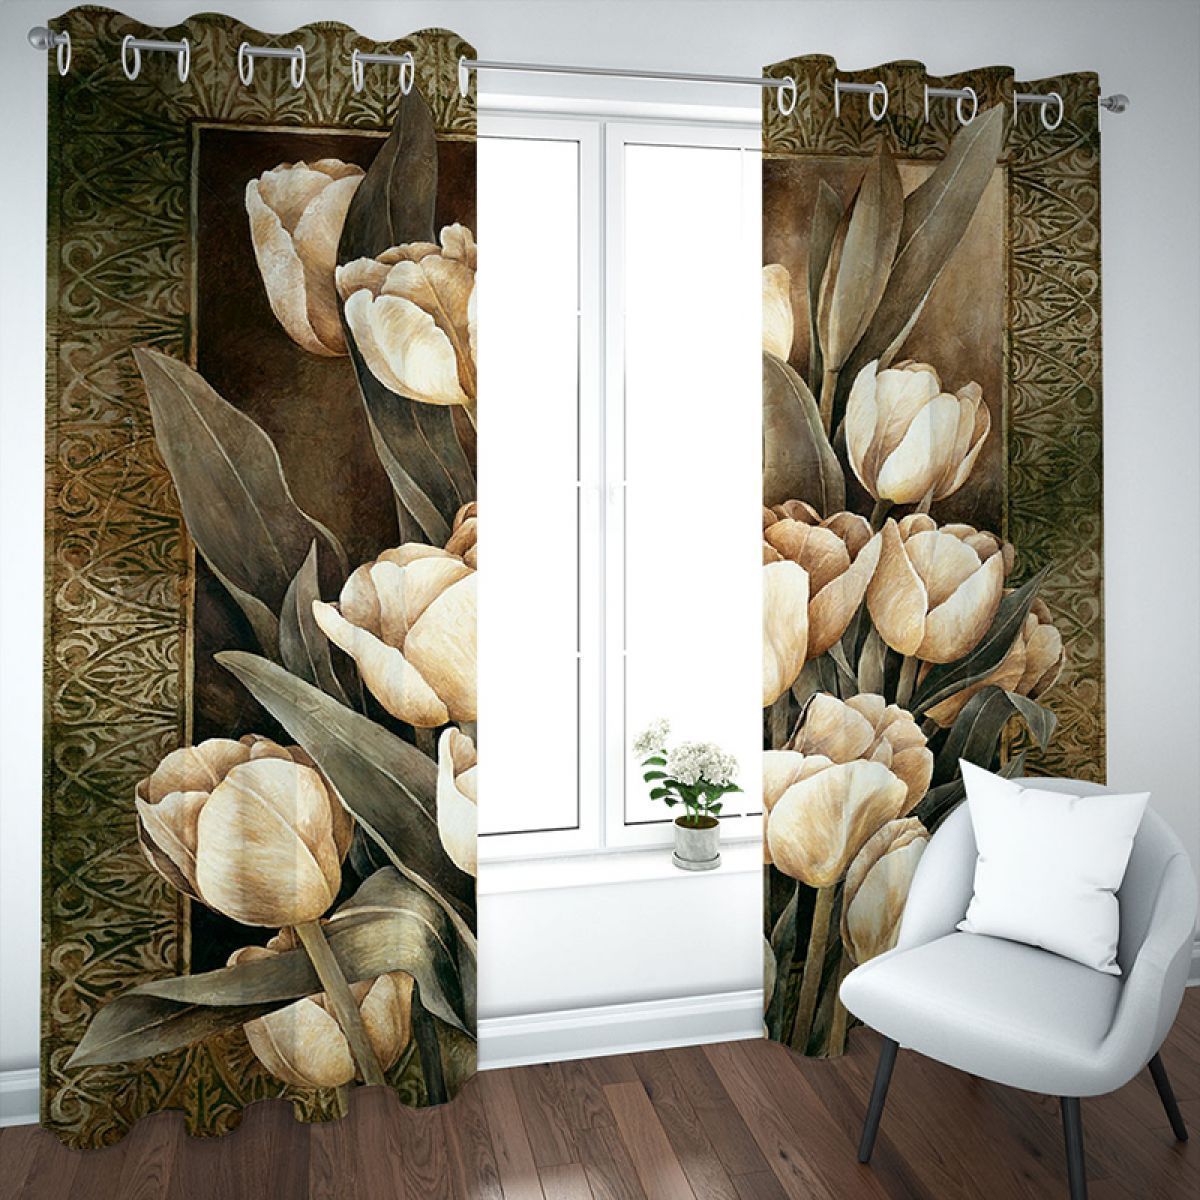 3d Gold Tulips Printed Window Curtain Home Decor